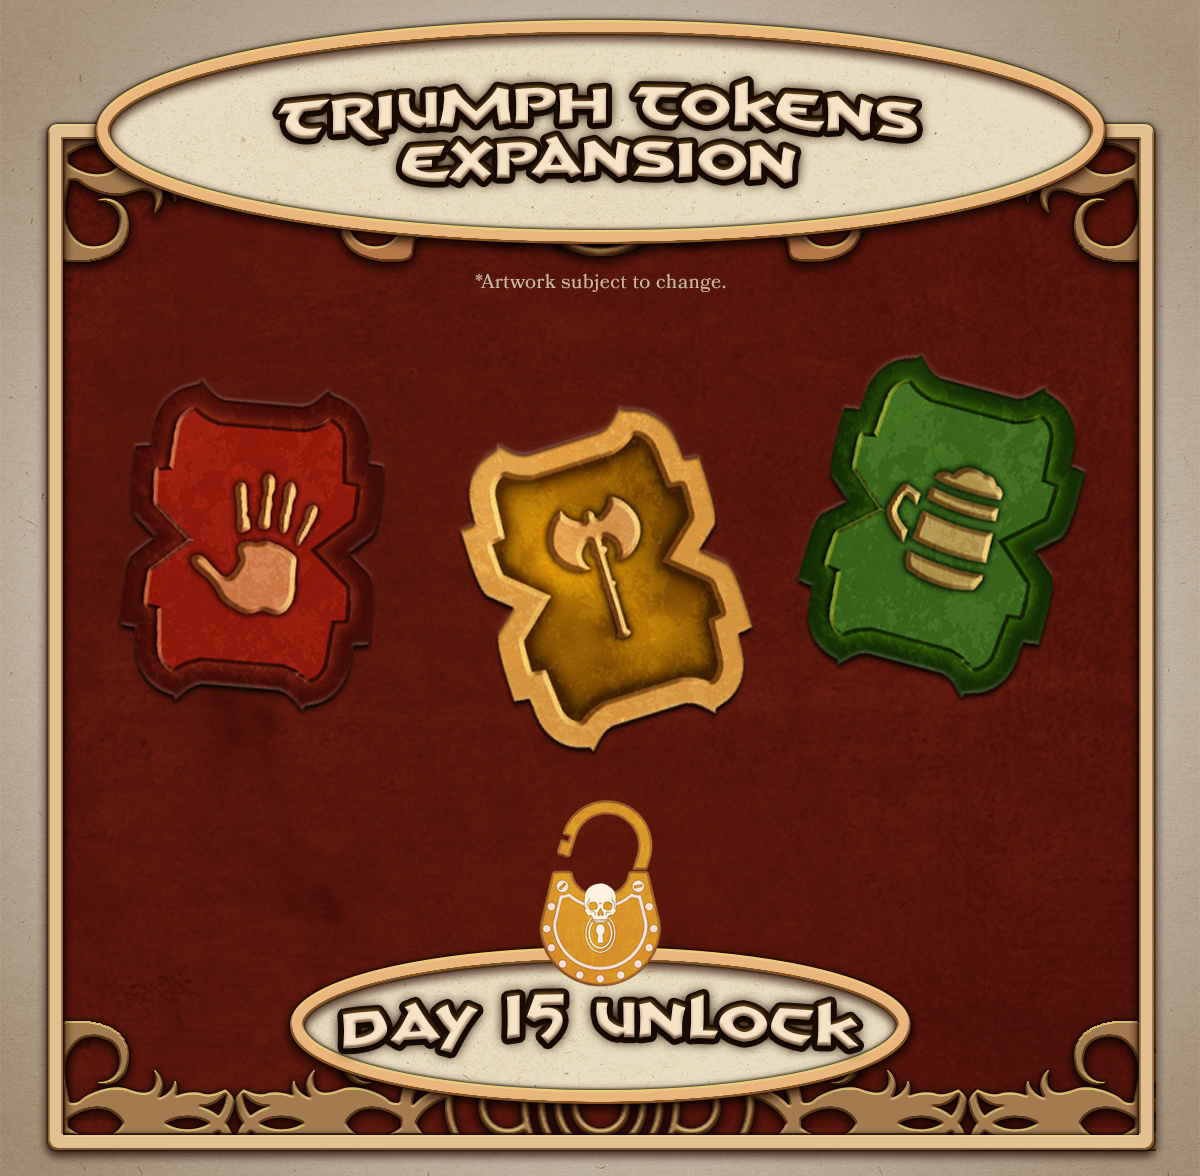 Triumph Tokens have arrived in The Adventures of Conan! ⚔️ Find out more: ow.ly/mijr50RFYBZ